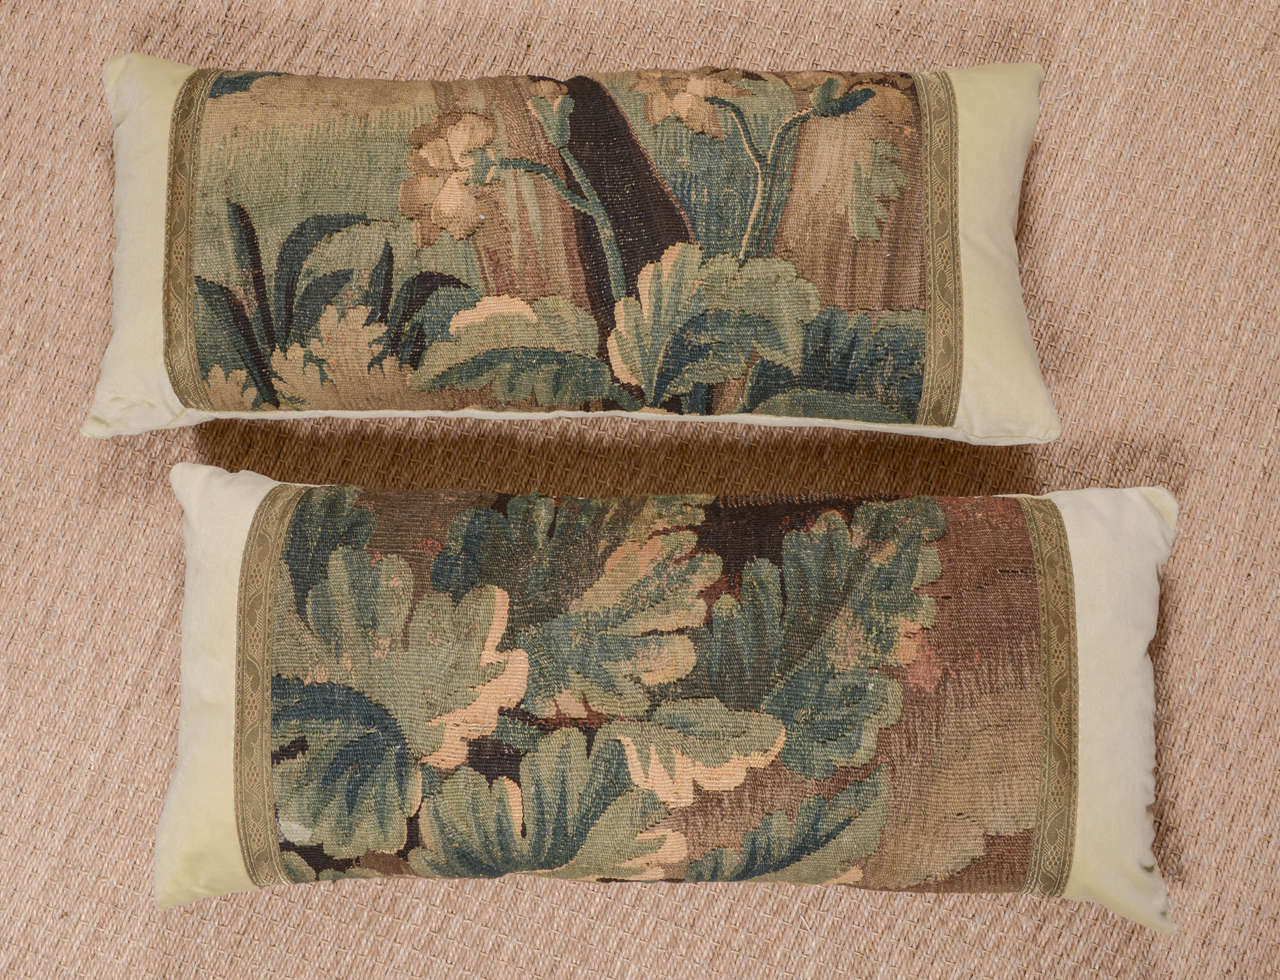 Pair of 18th century French tapestry fragment pillow depicting foliage from a larger tapestry.Tapestry is bordered with vintage gold metallic trim. Body of pillow composed of Citron colored  velvet. Down filled.

Custom Made from 18th century